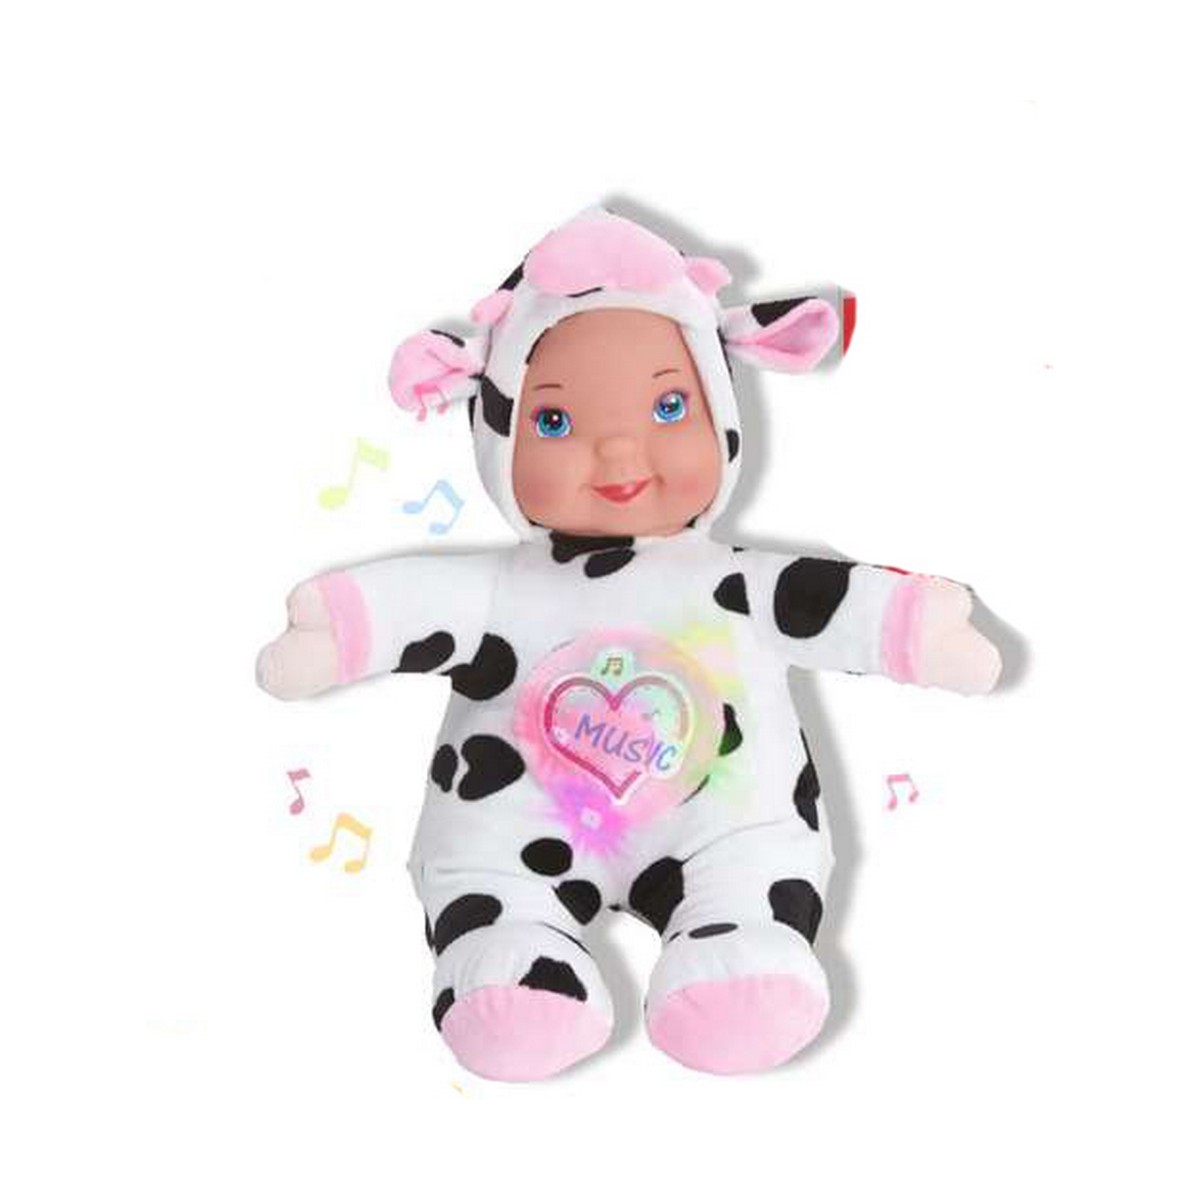 Baby doll Reig Peluche Musicale 35 cm Mucca